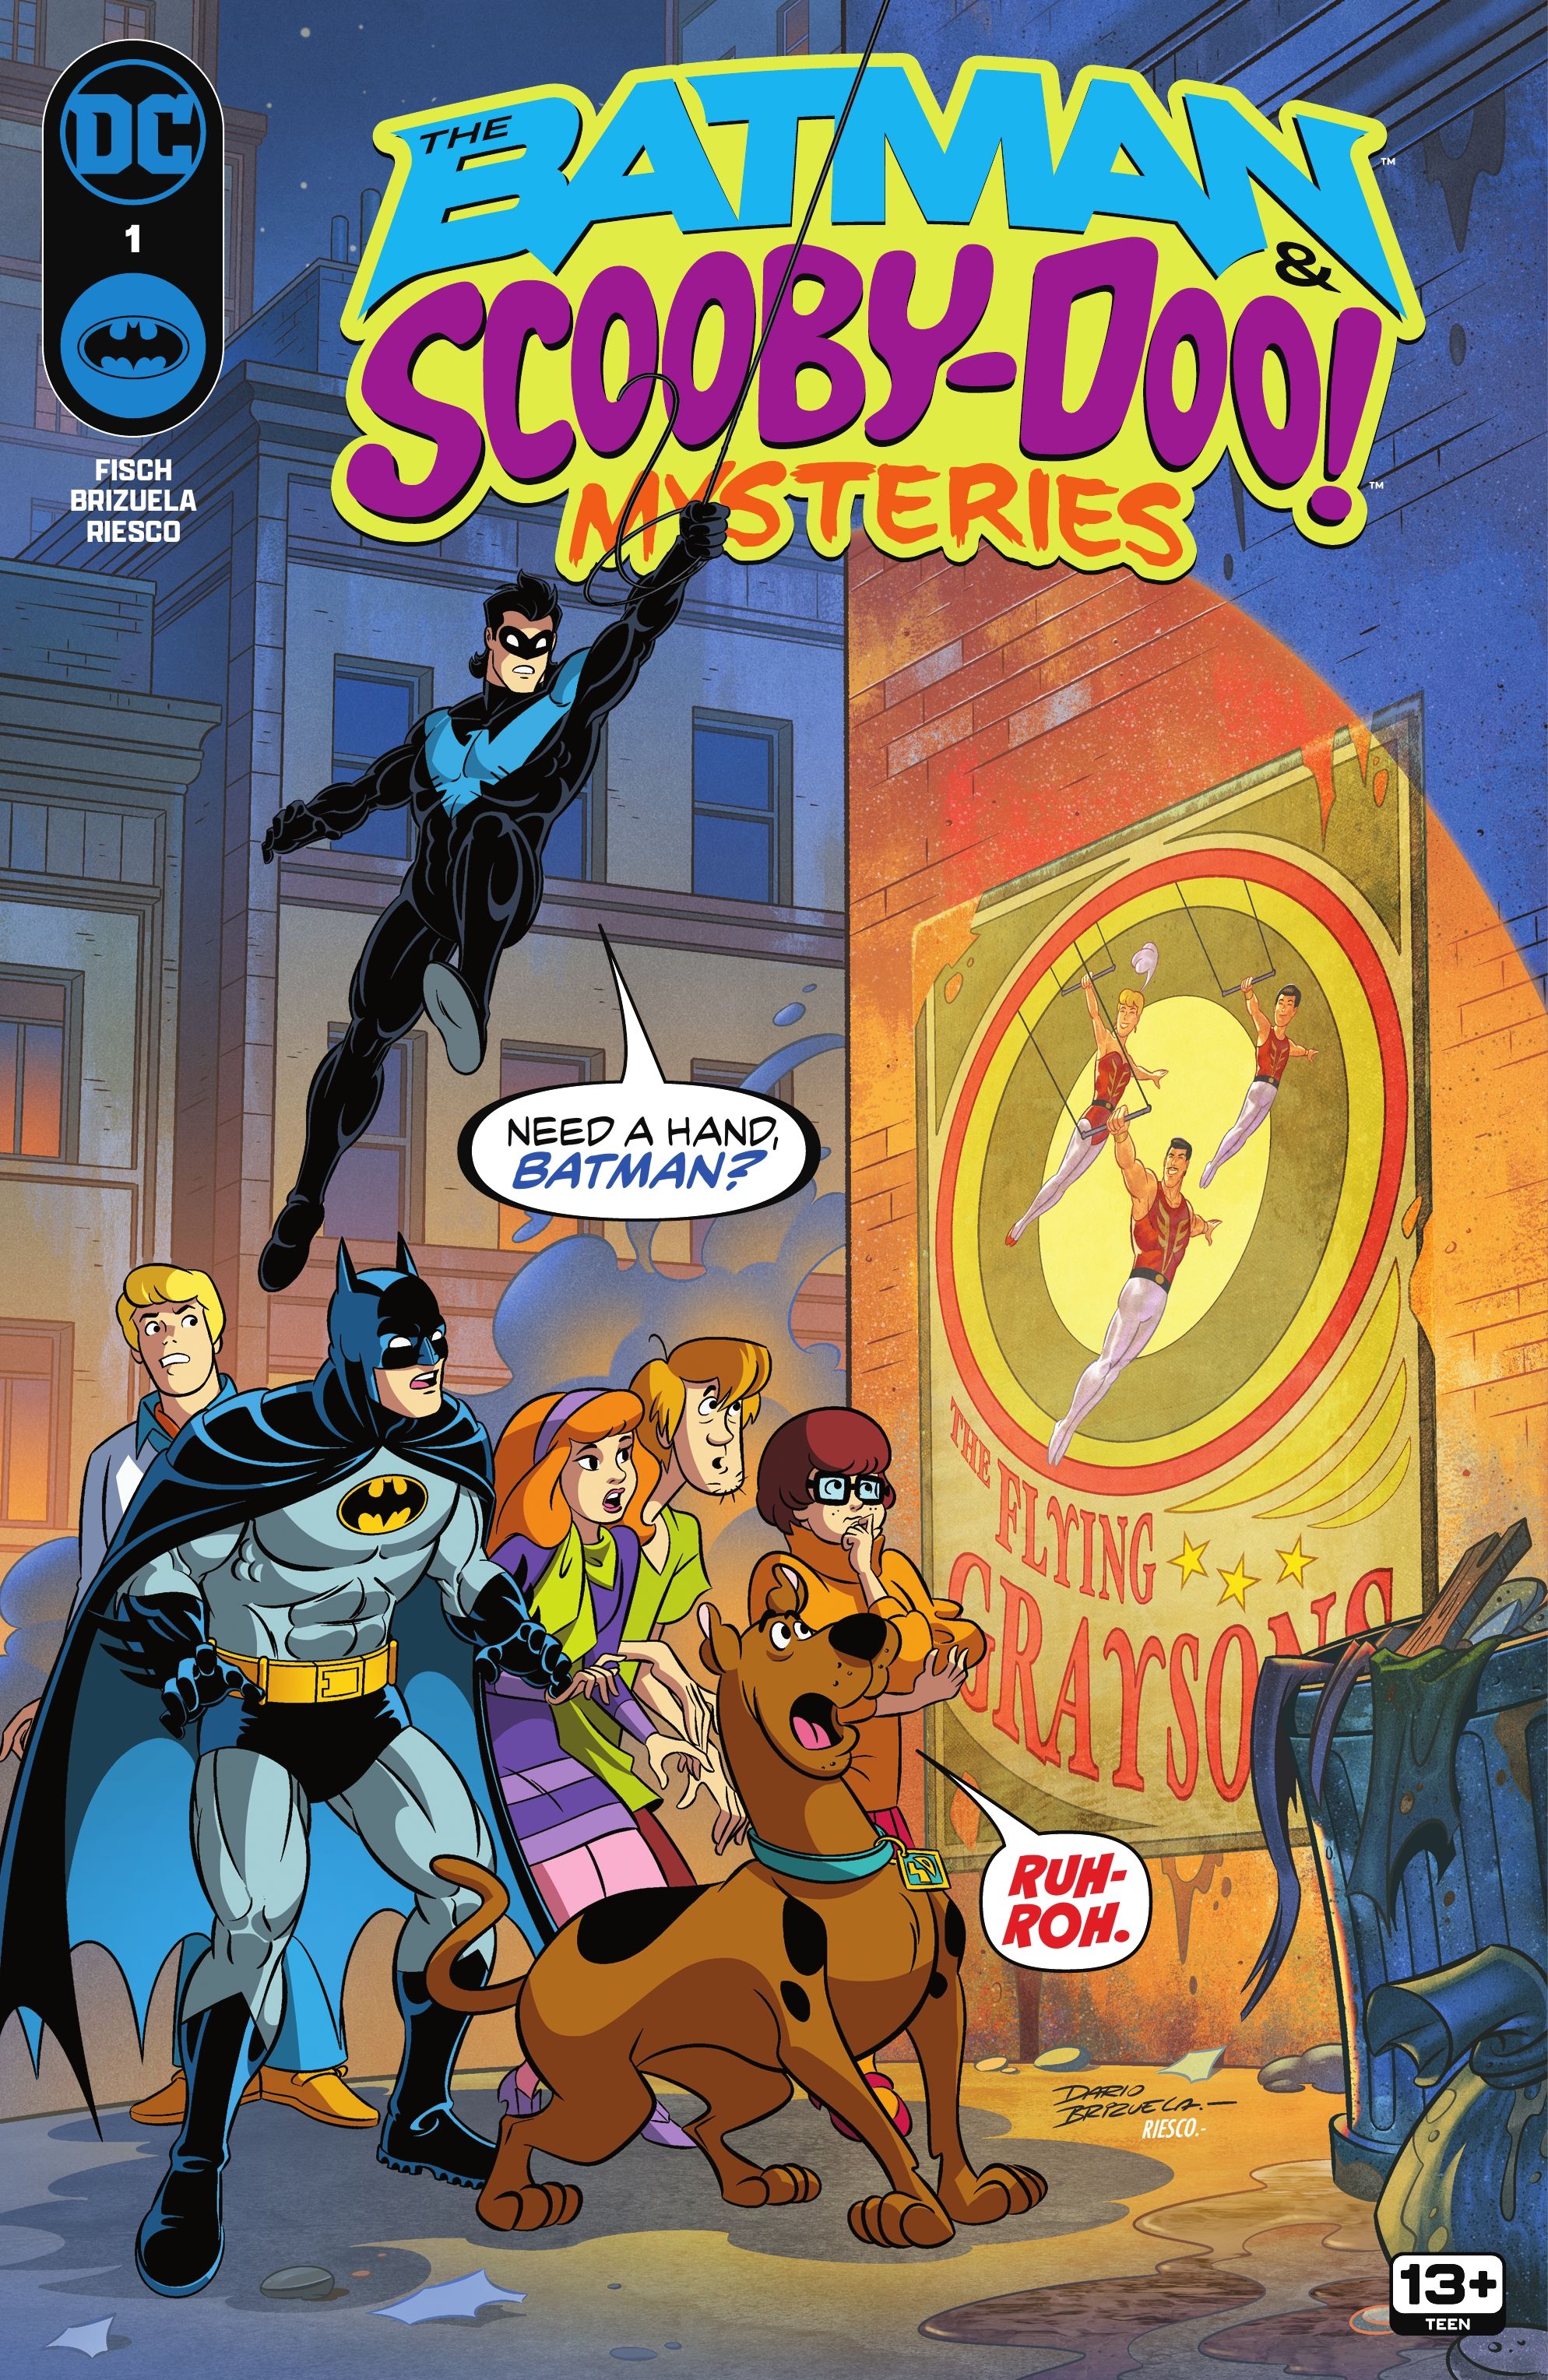 The Batman & Scooby-Doo Mysteries #1 Cover A